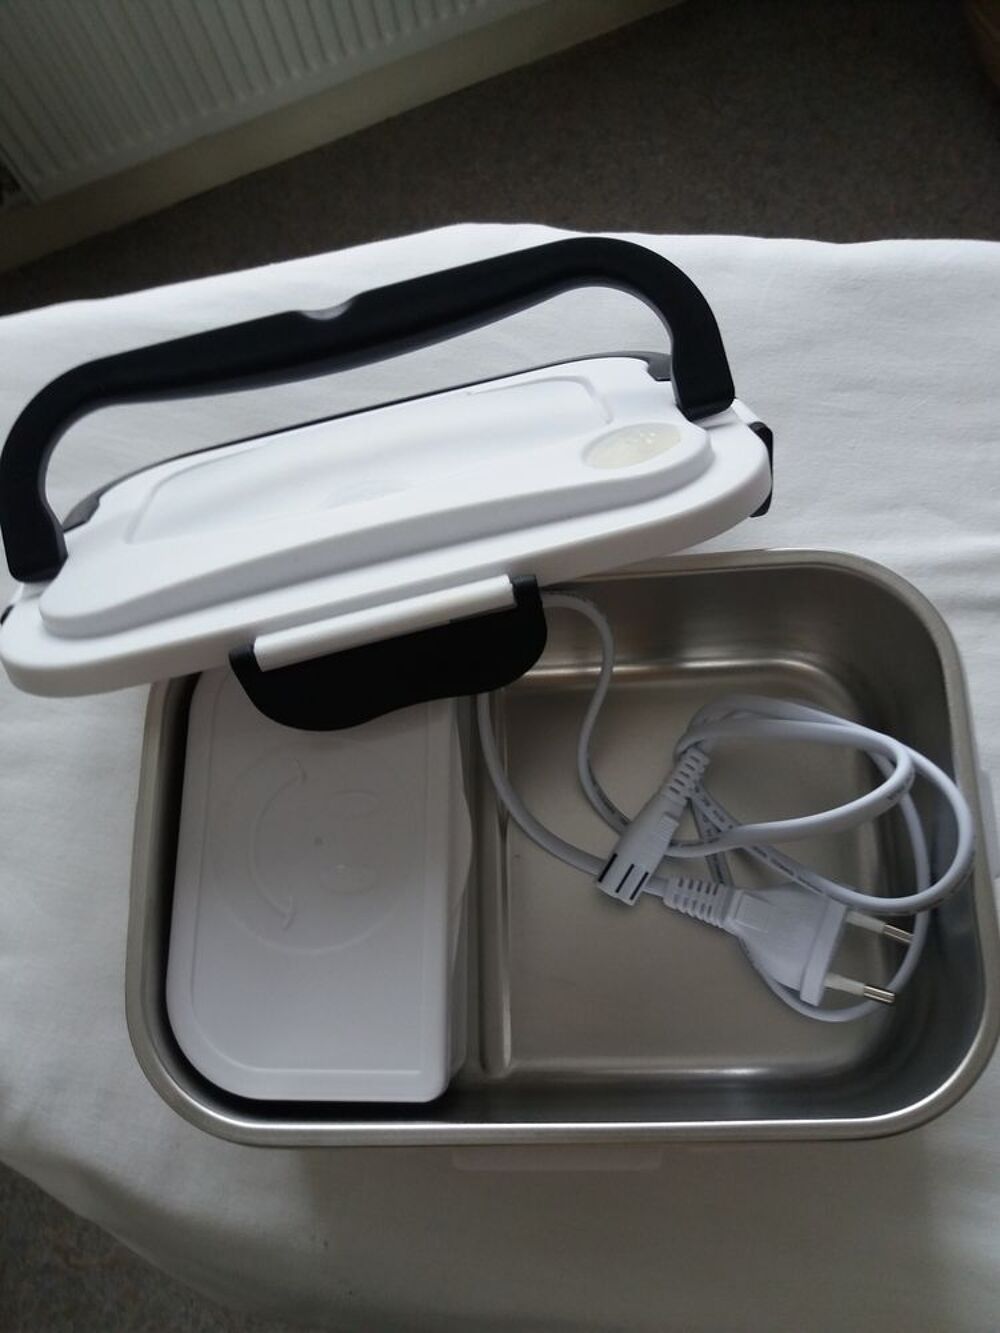 LUNCH BOX ELECTRIQUE SIMEO Electromnager